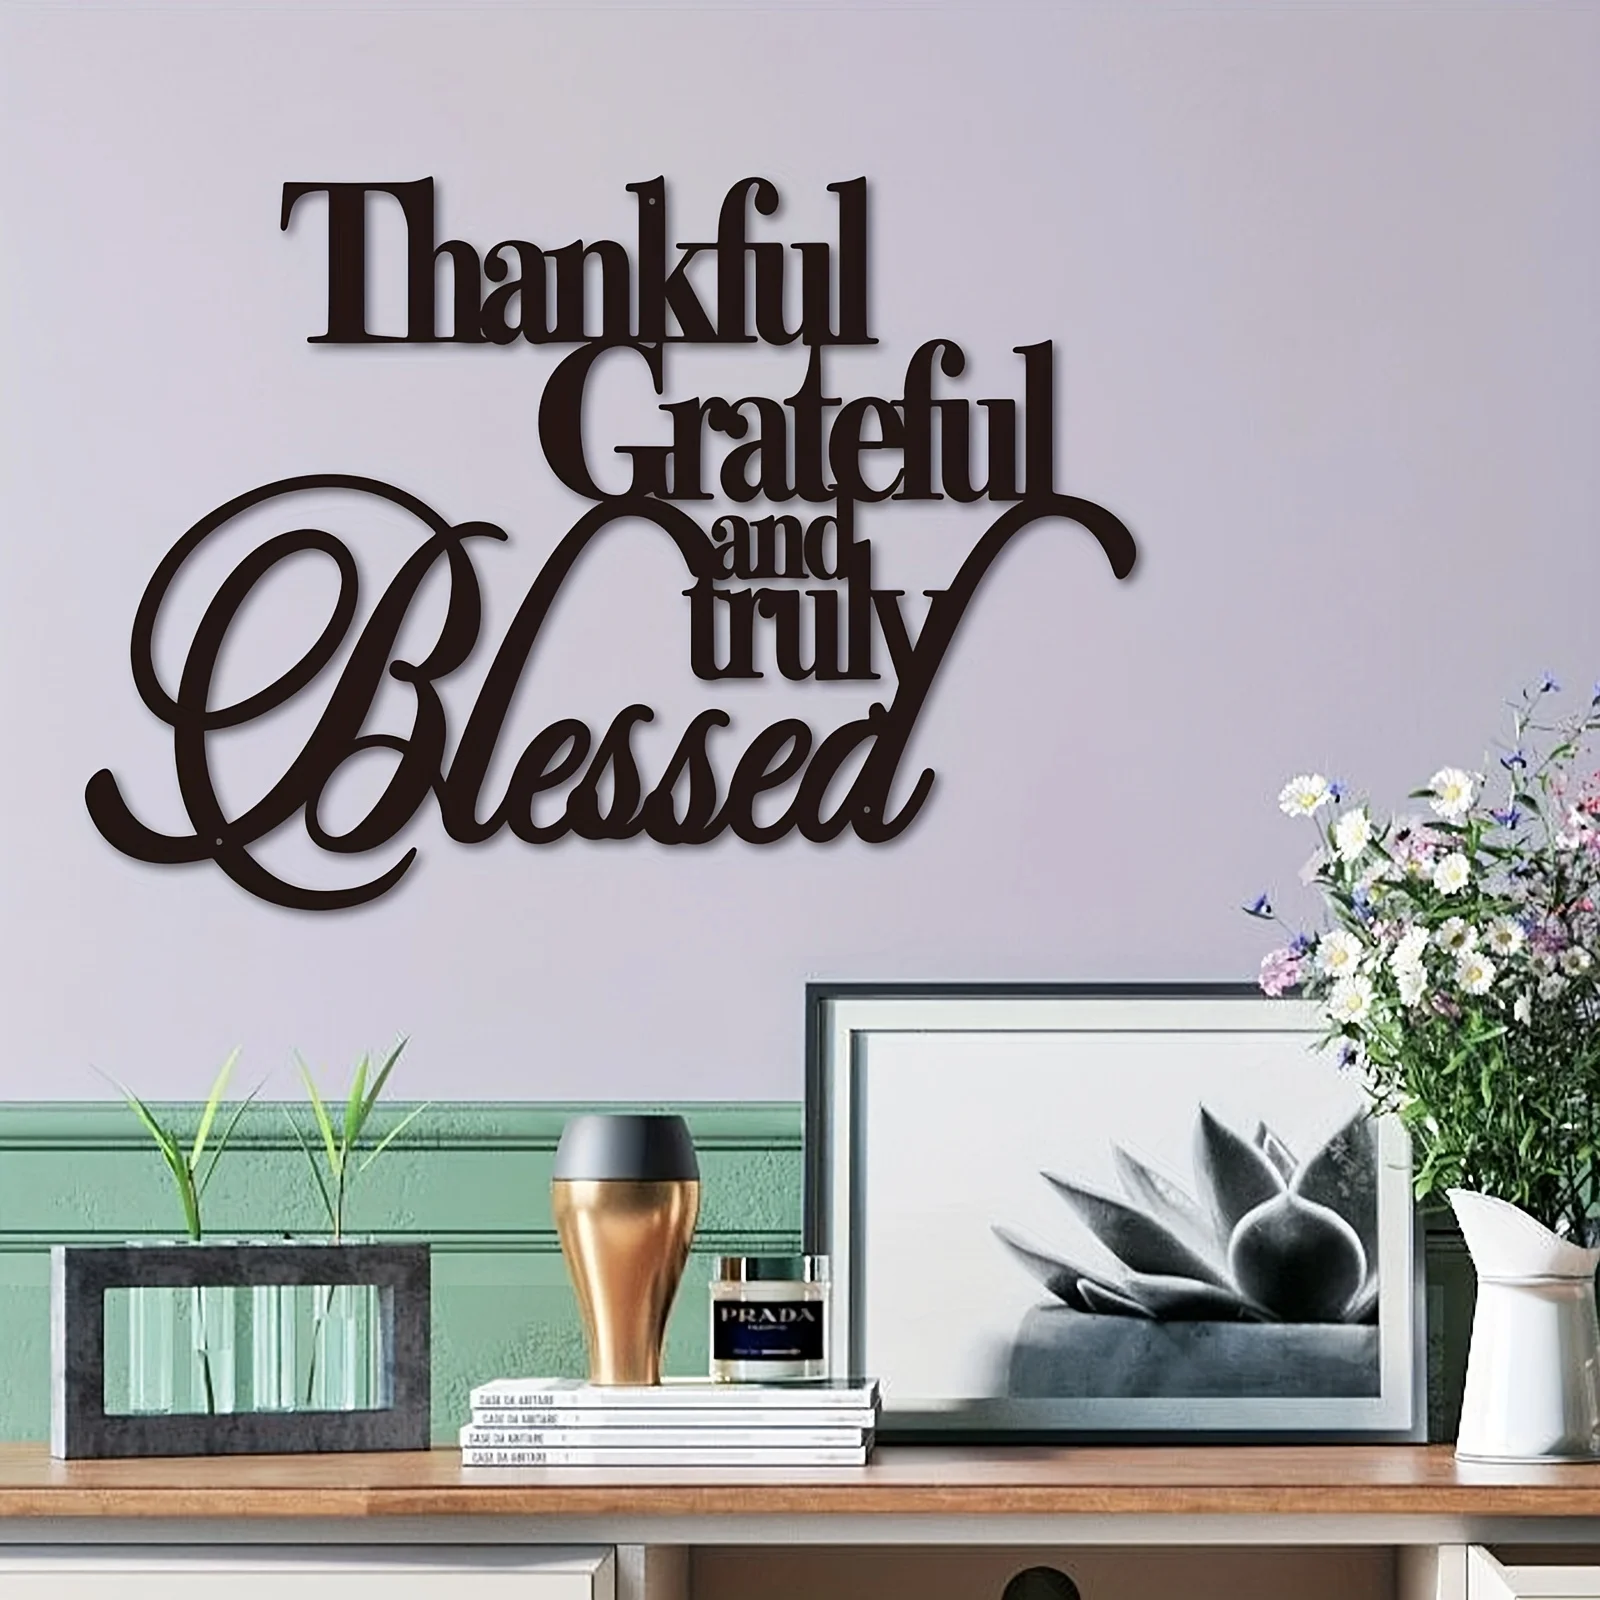 

1pc, Thankful Grateful And Truly Blessed Metal Sign, Personalized Wall Decor, Metal Wall Art, Wall Signs For Office Room Home De